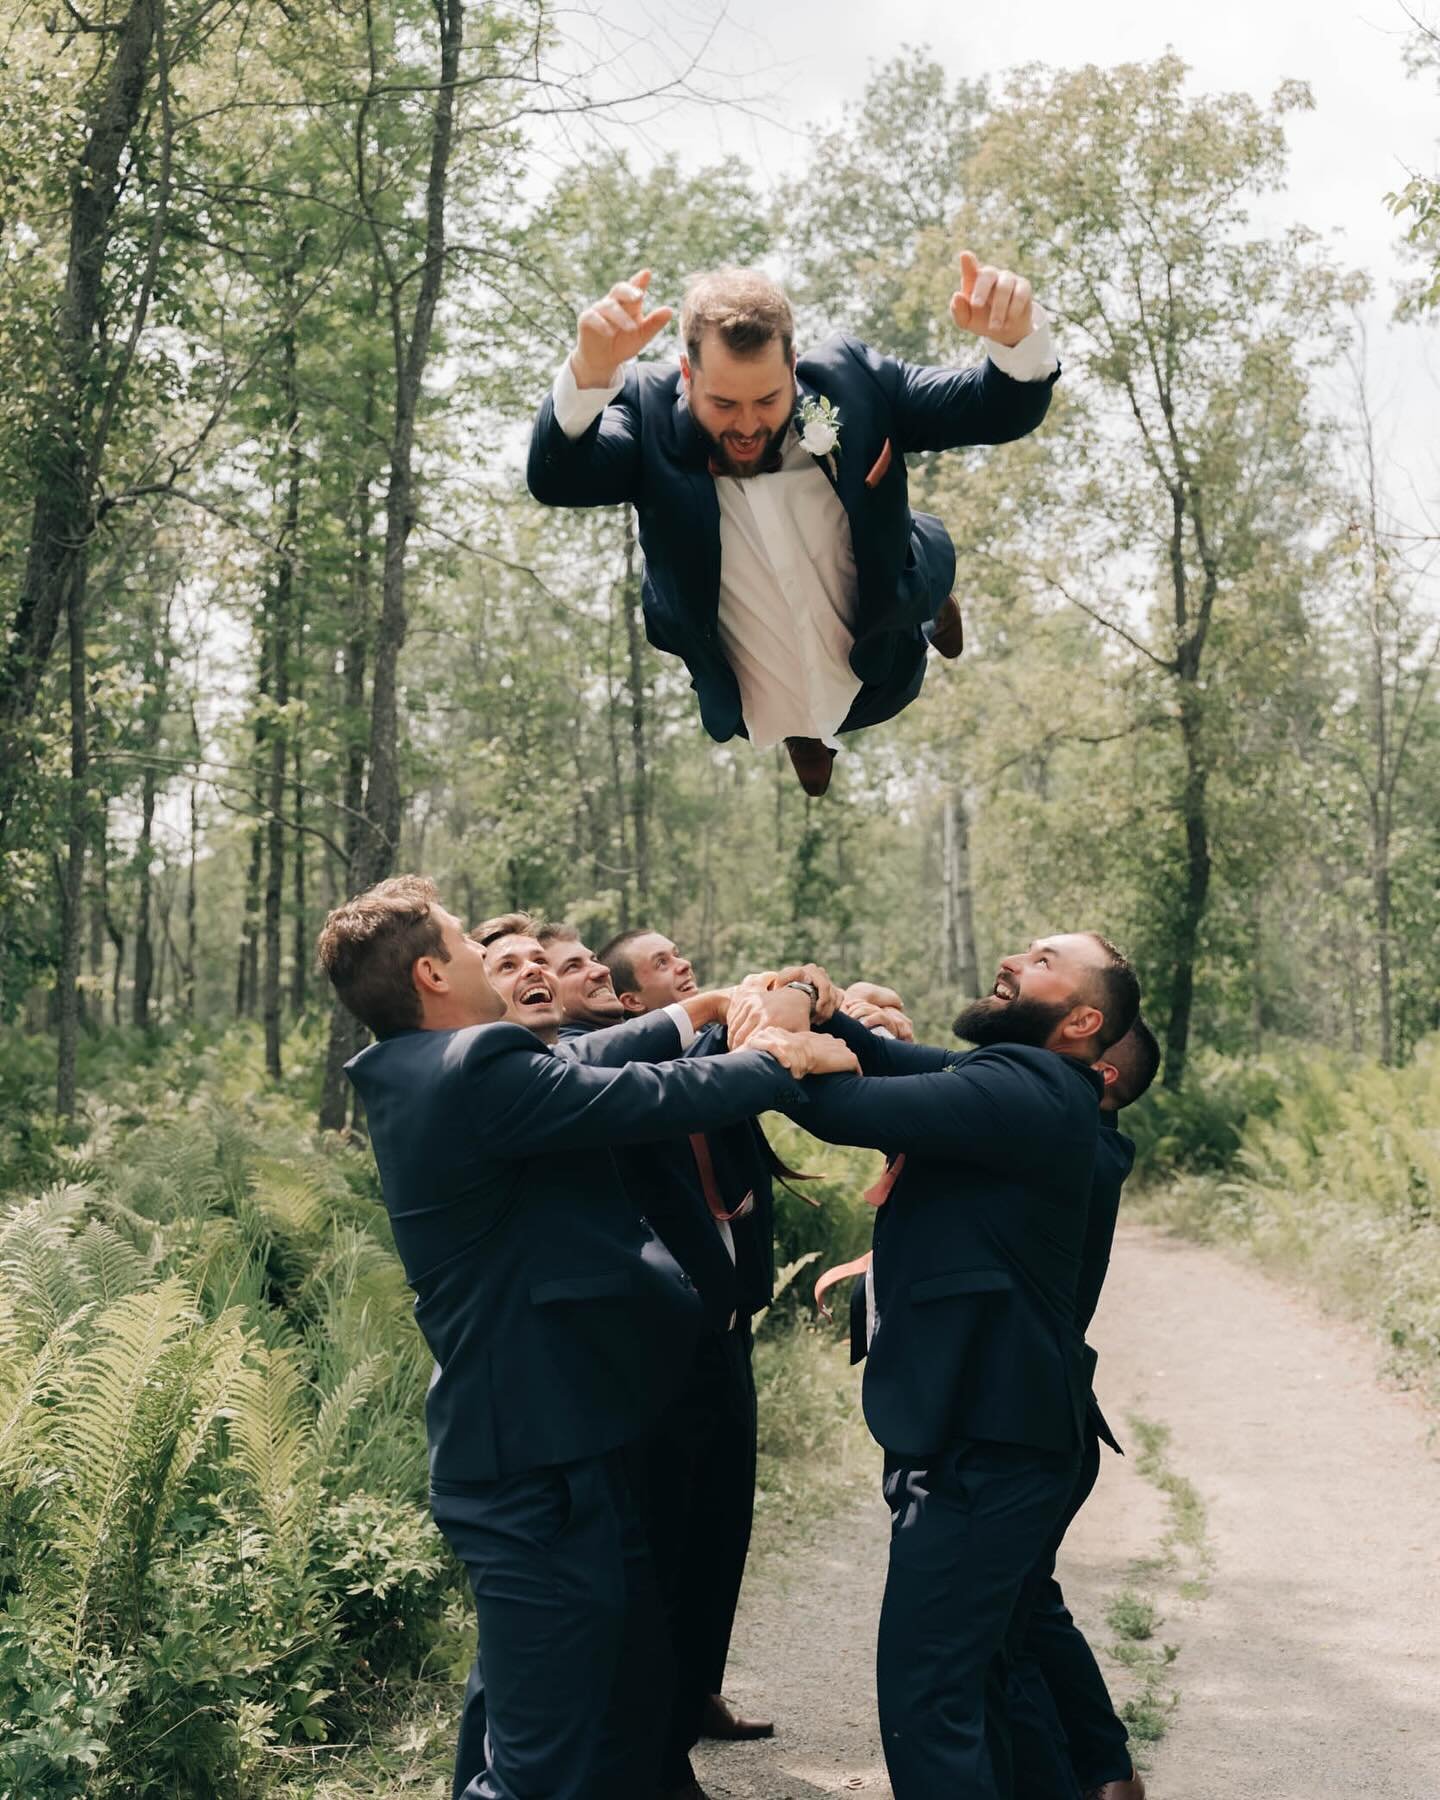 A classic pose for these gents! 😆☁️ See more from Jessica + Liam&rsquo;s day on stories today! #dreamheartcreative #thunderbaywedding

#thunderbayweddingphotographer #ontariowedding #ontarioweddingphotographer #thunderbay